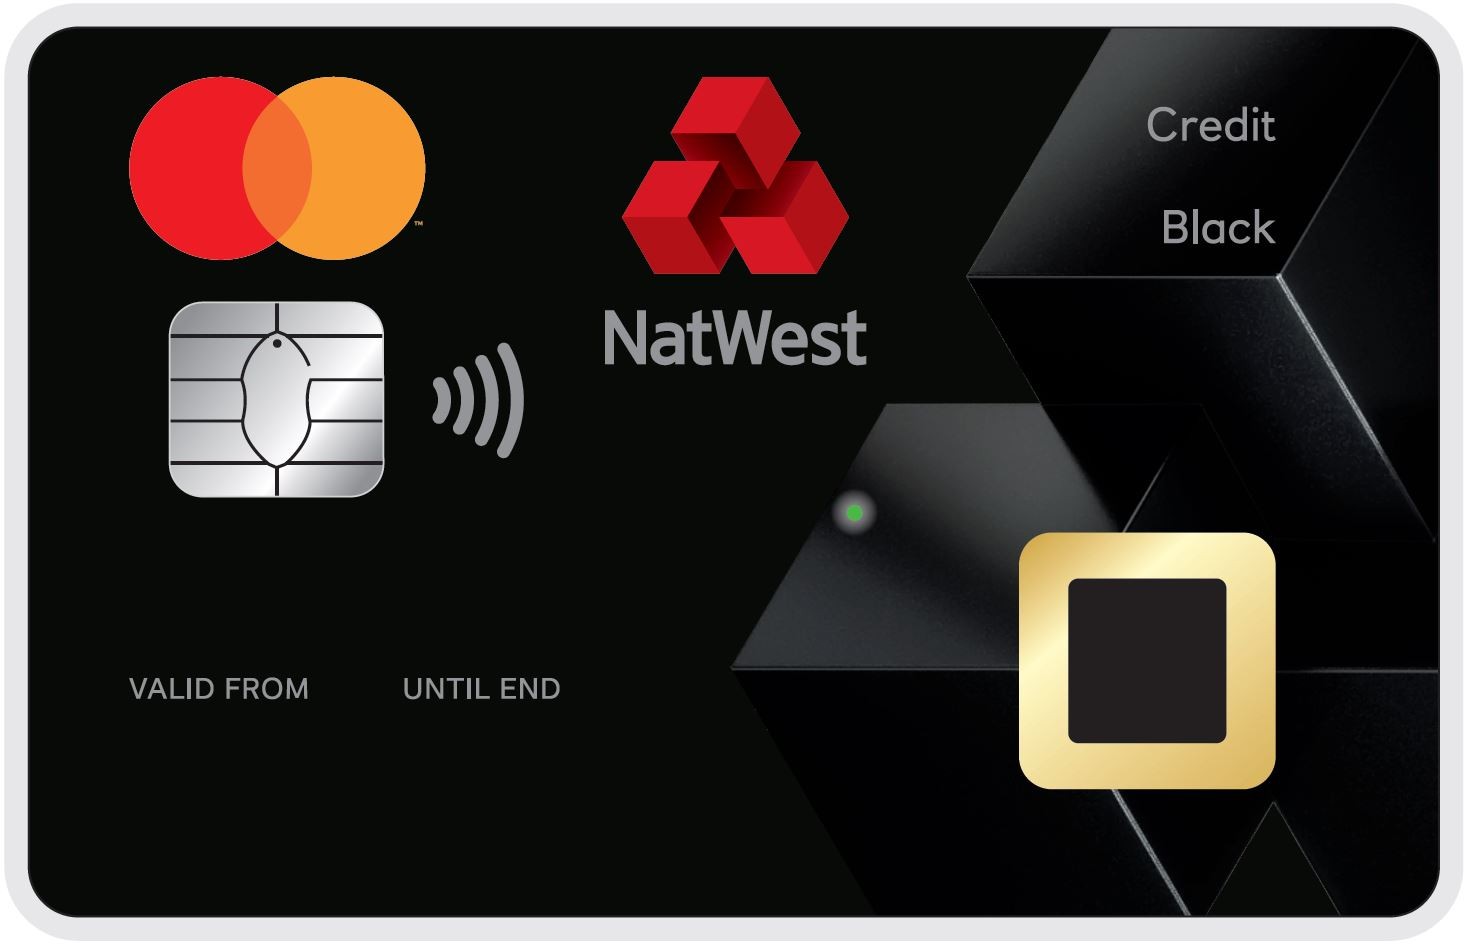 Natwest Card - See How to Apply